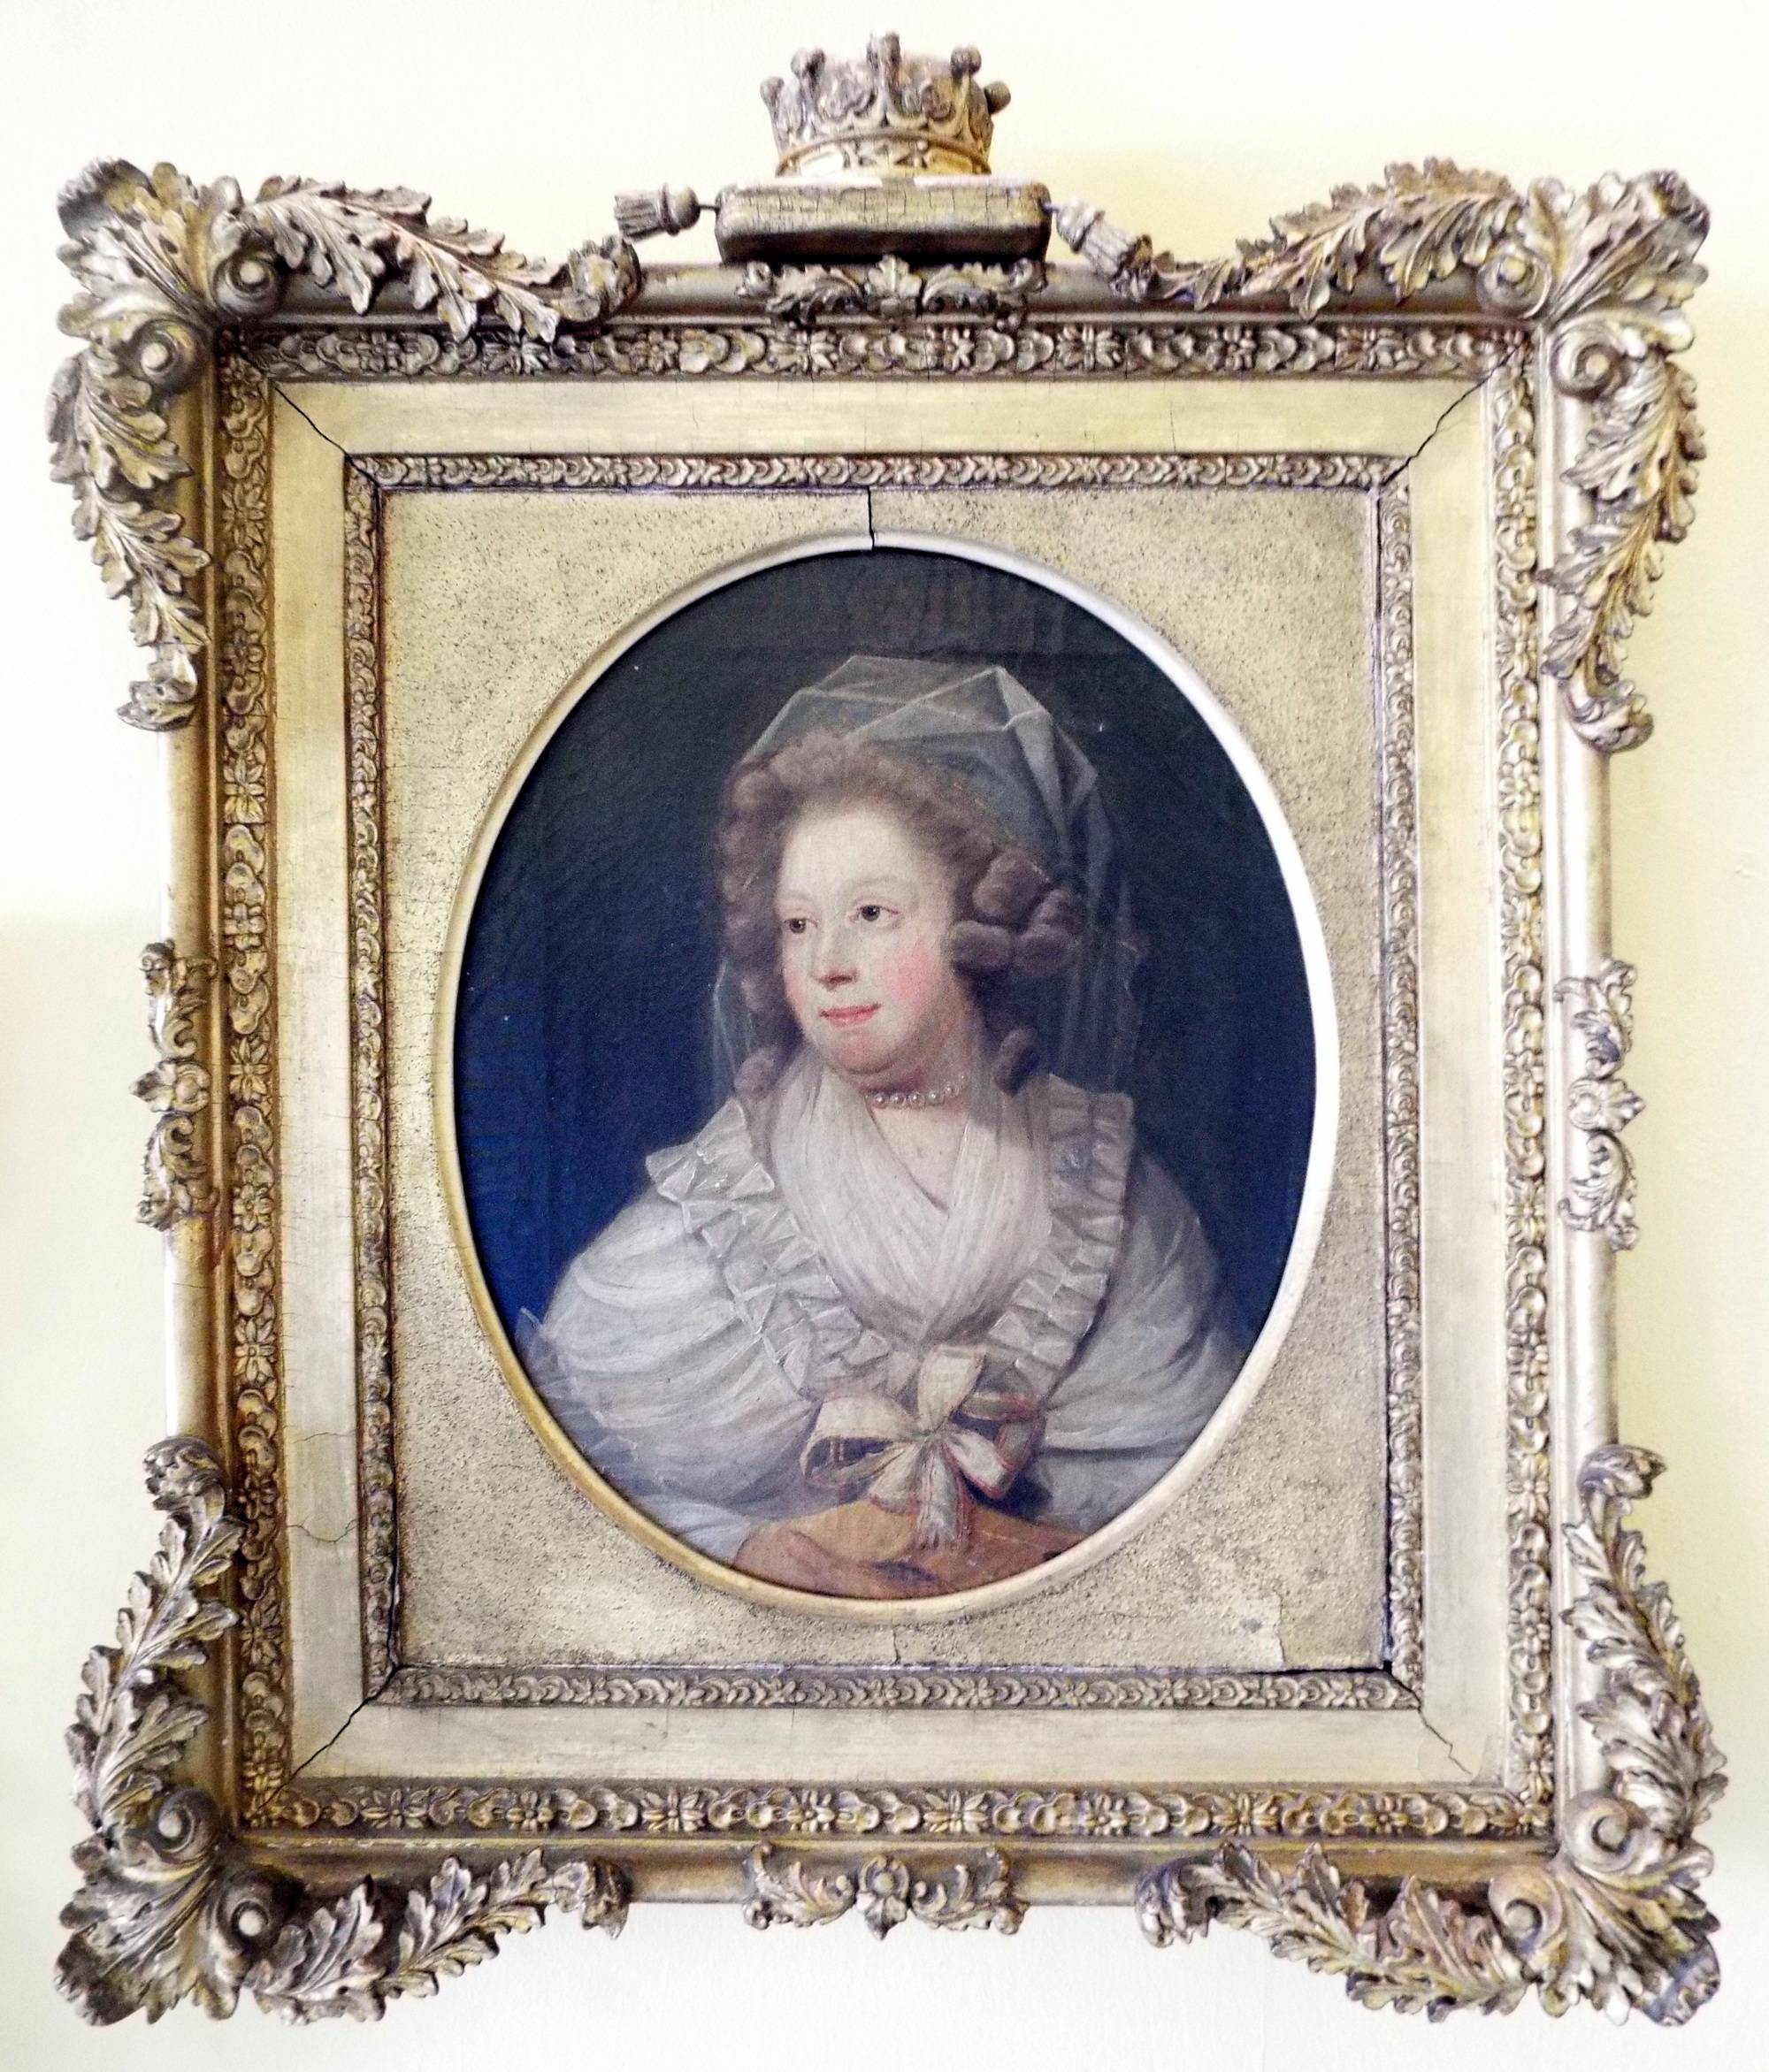 Mary Caulfeild (née Hickman), Countess of Charlemont, probably by an artist in the circle of John Downman (1750-1824). The Hunt Museum, Limerick. 